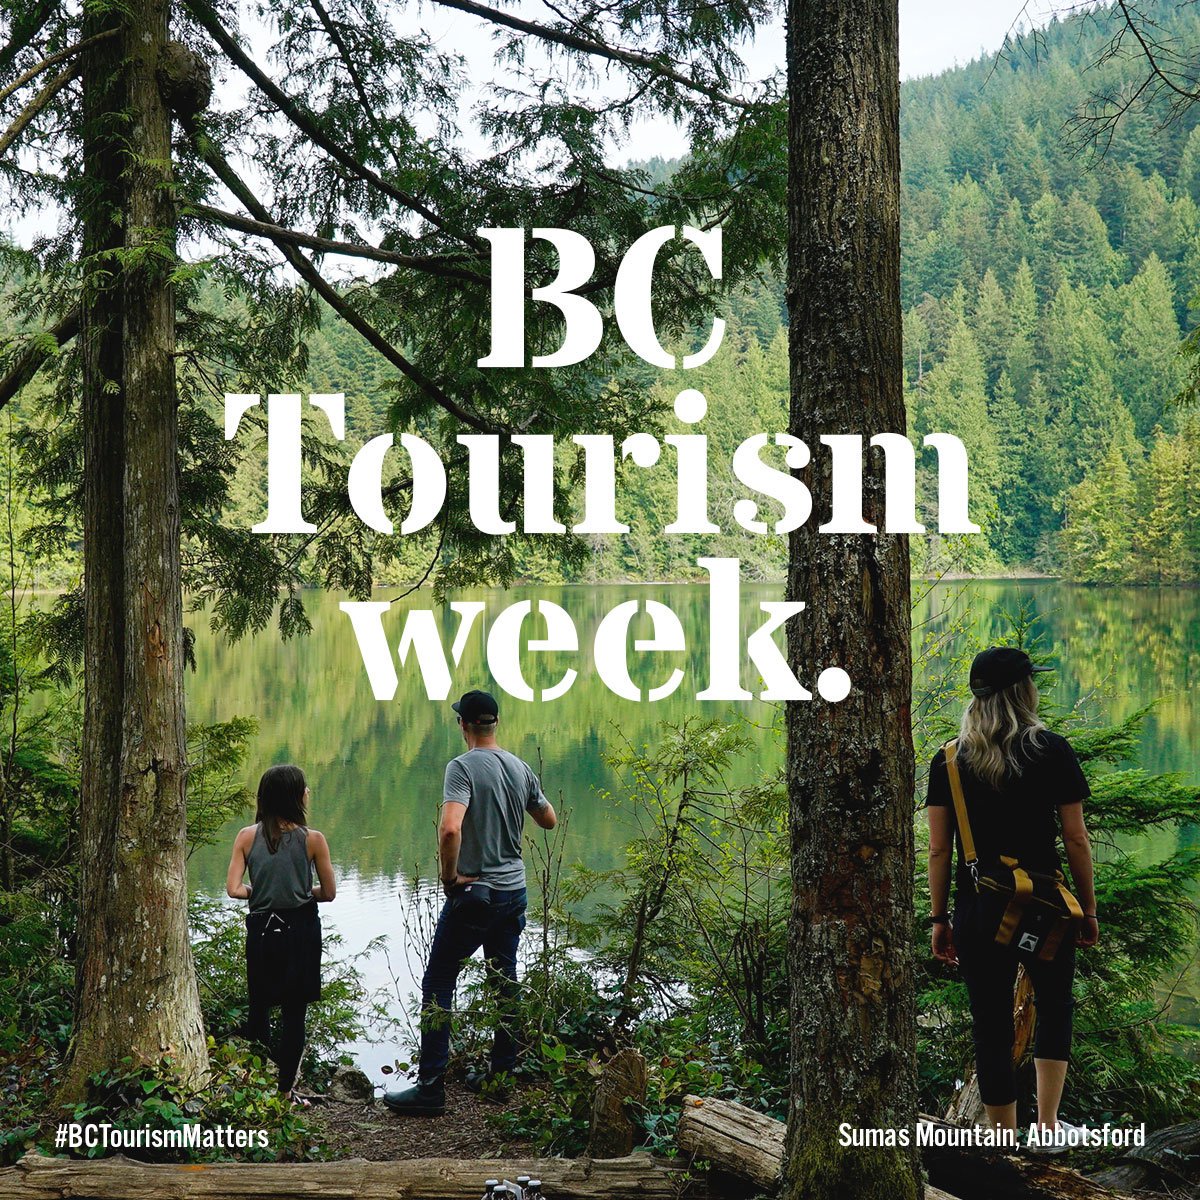 TOURISM WEEK. Did you know it's #BCTourismWeek? So let's celebrate and spread the word about the power of tourism in British Columbia! Follow along this week as we share why #BCTourismMatters in #Abbotsford & @thefraservalley.